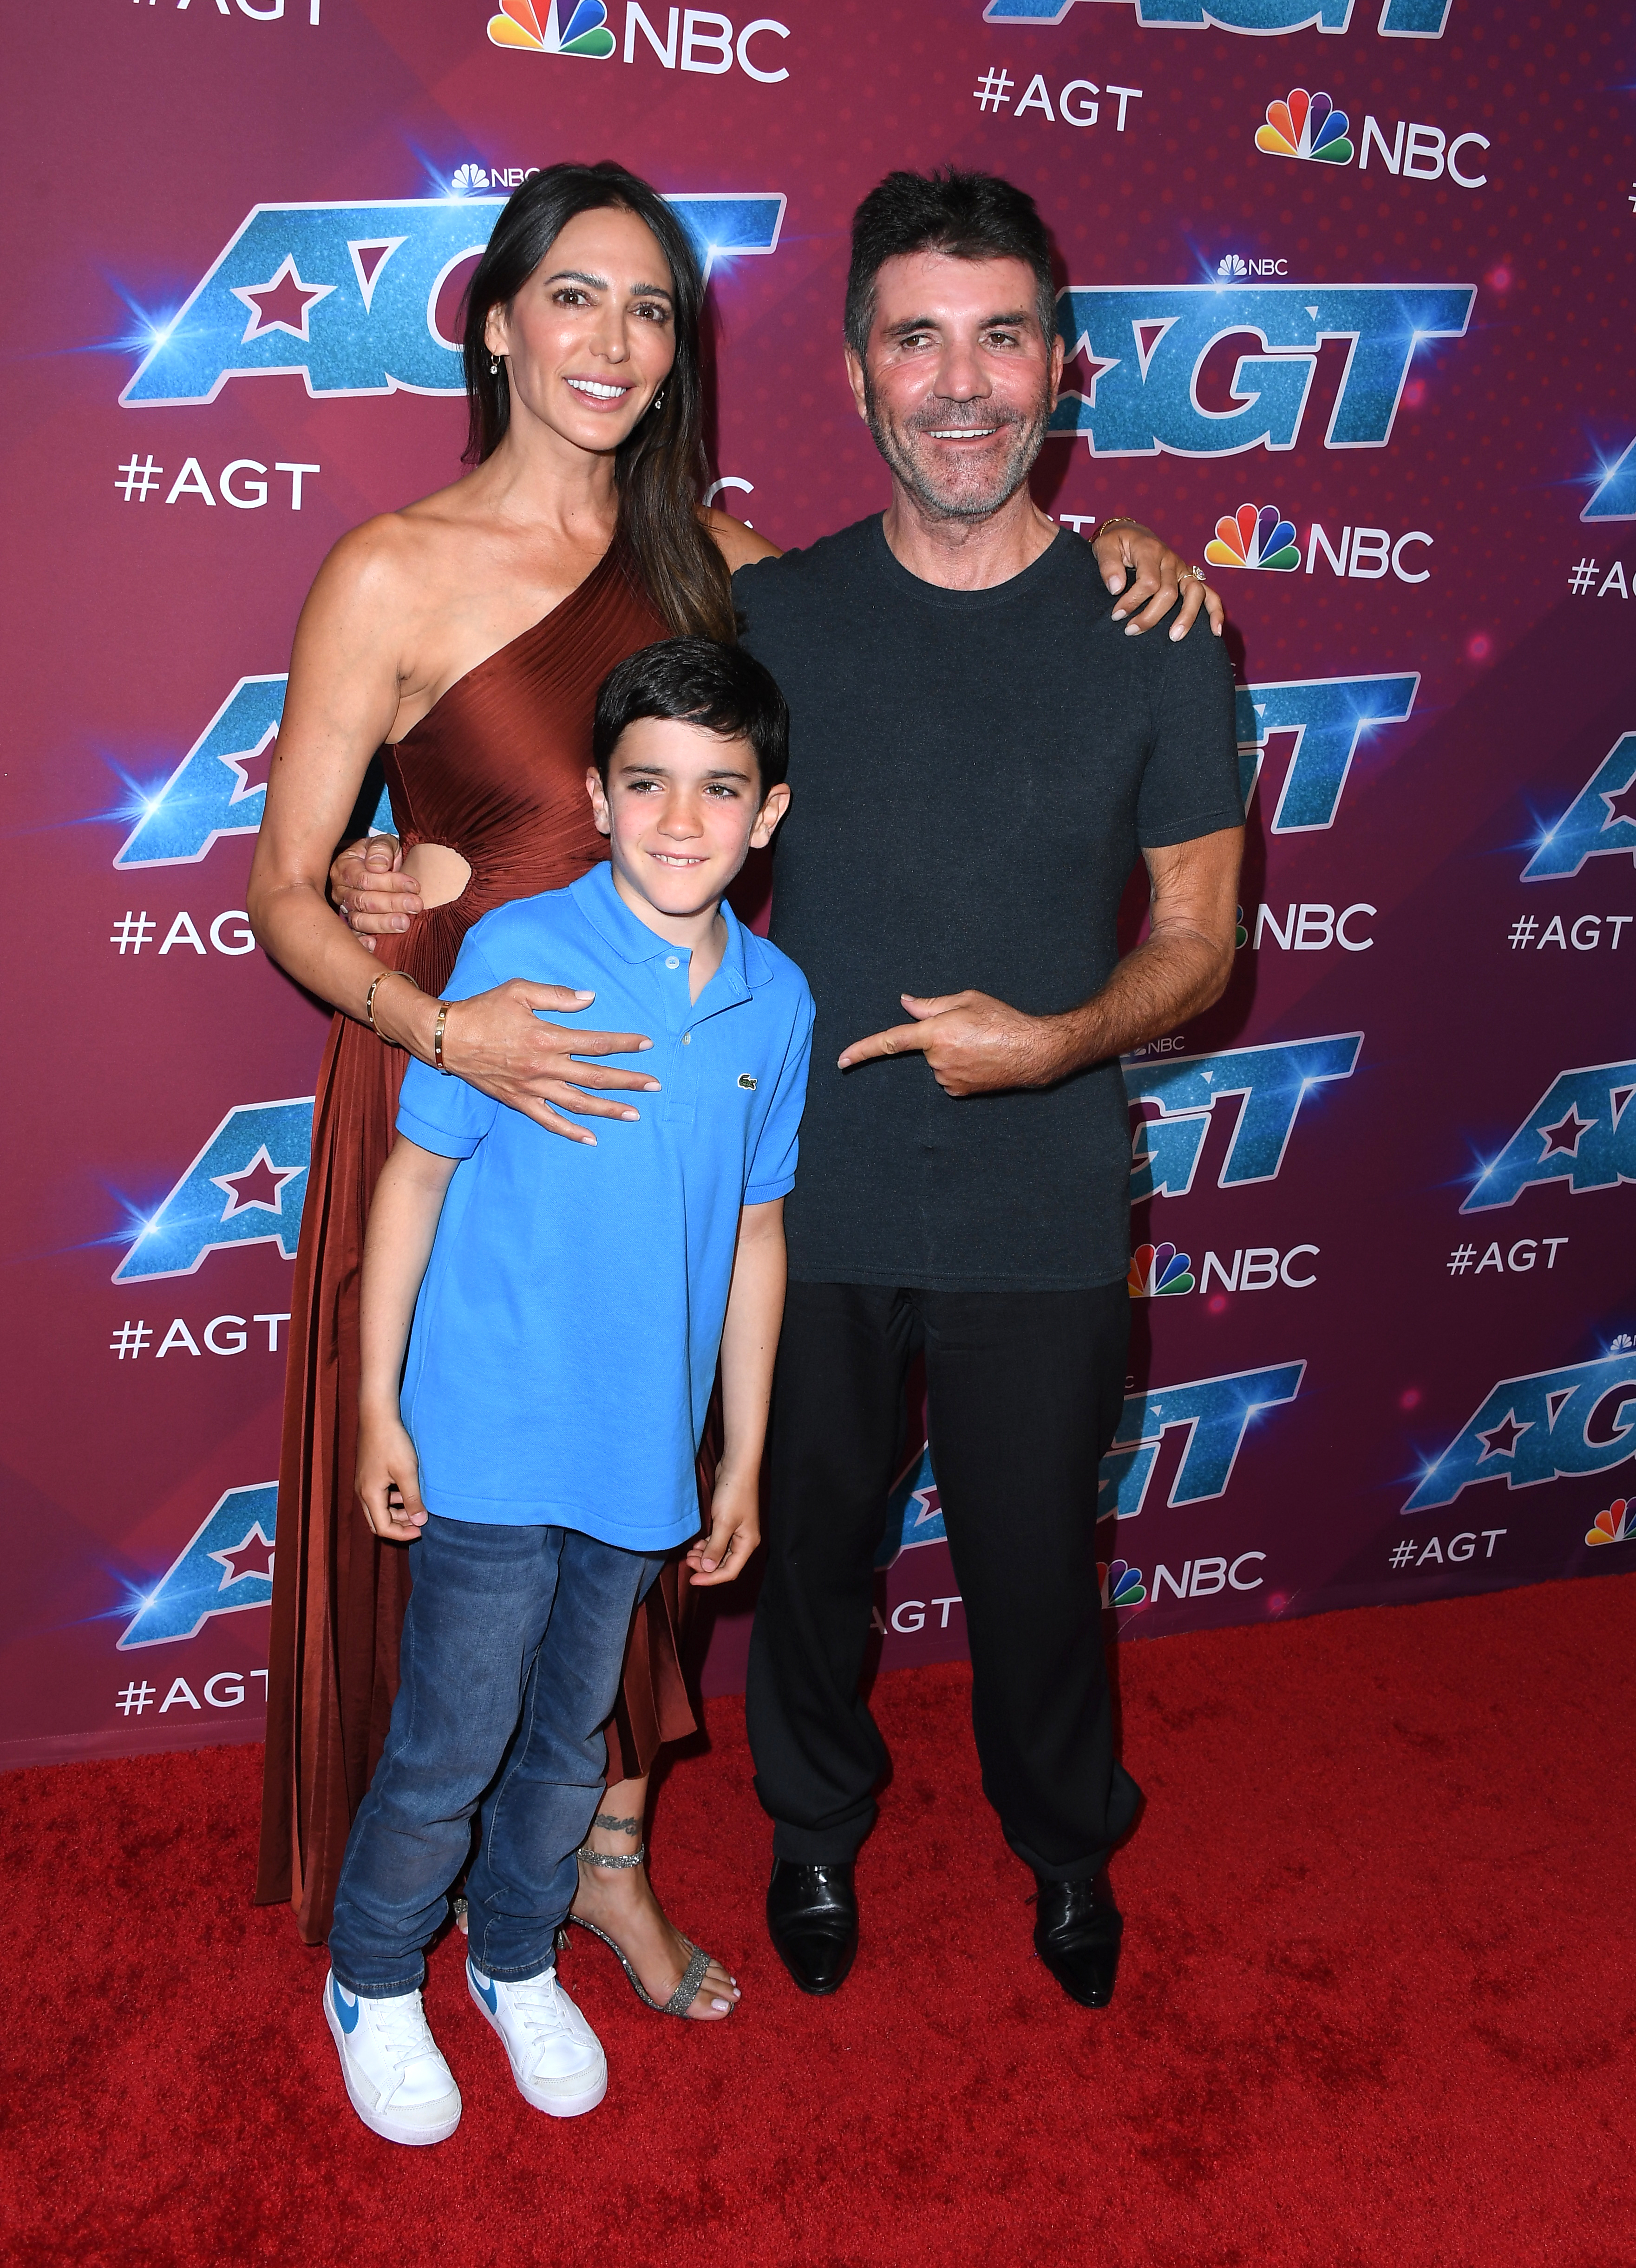 Lauren Silverman, Simon Cowell and their son Eric Cowell at Sheraton Pasadena Hotel on September 13, 2022 in Pasadena, California. | Source: Getty Images